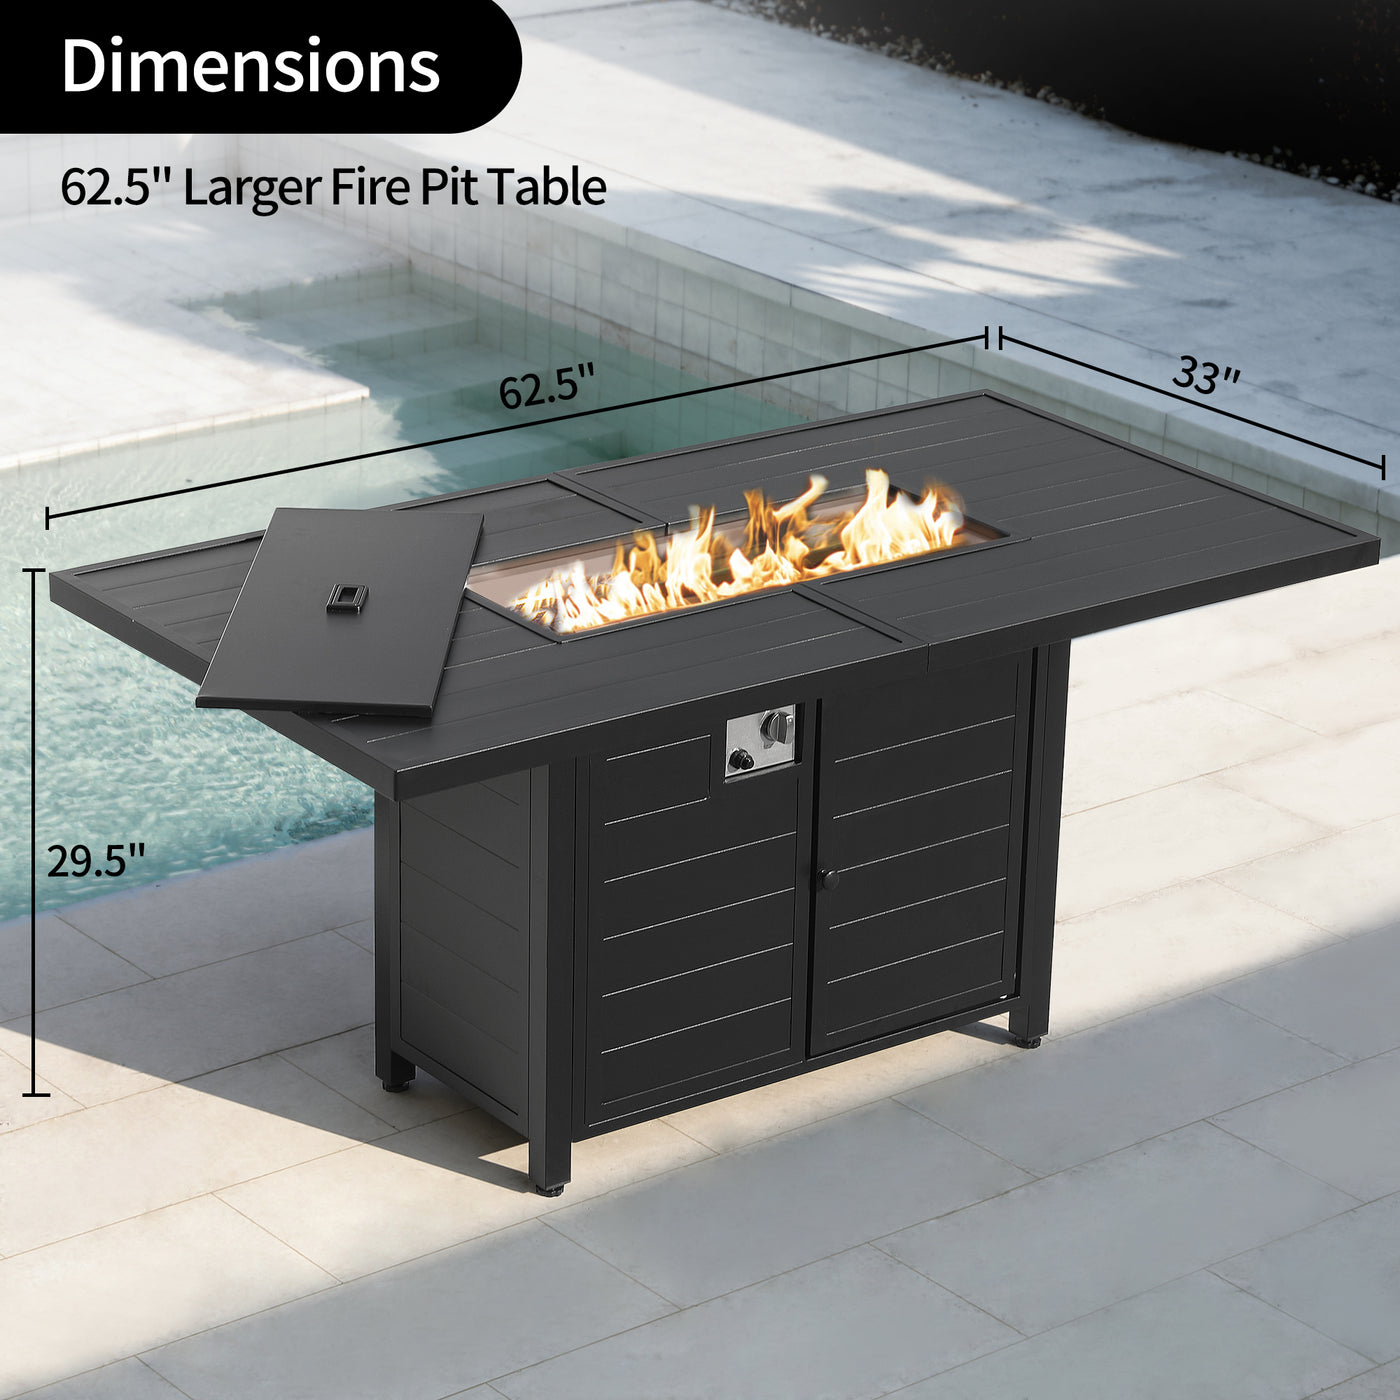 Pizzello Passione - 62.5" Aluminum Propane Fire Pit Table 50,000 BTU Outdoor Rectangular Dining Table